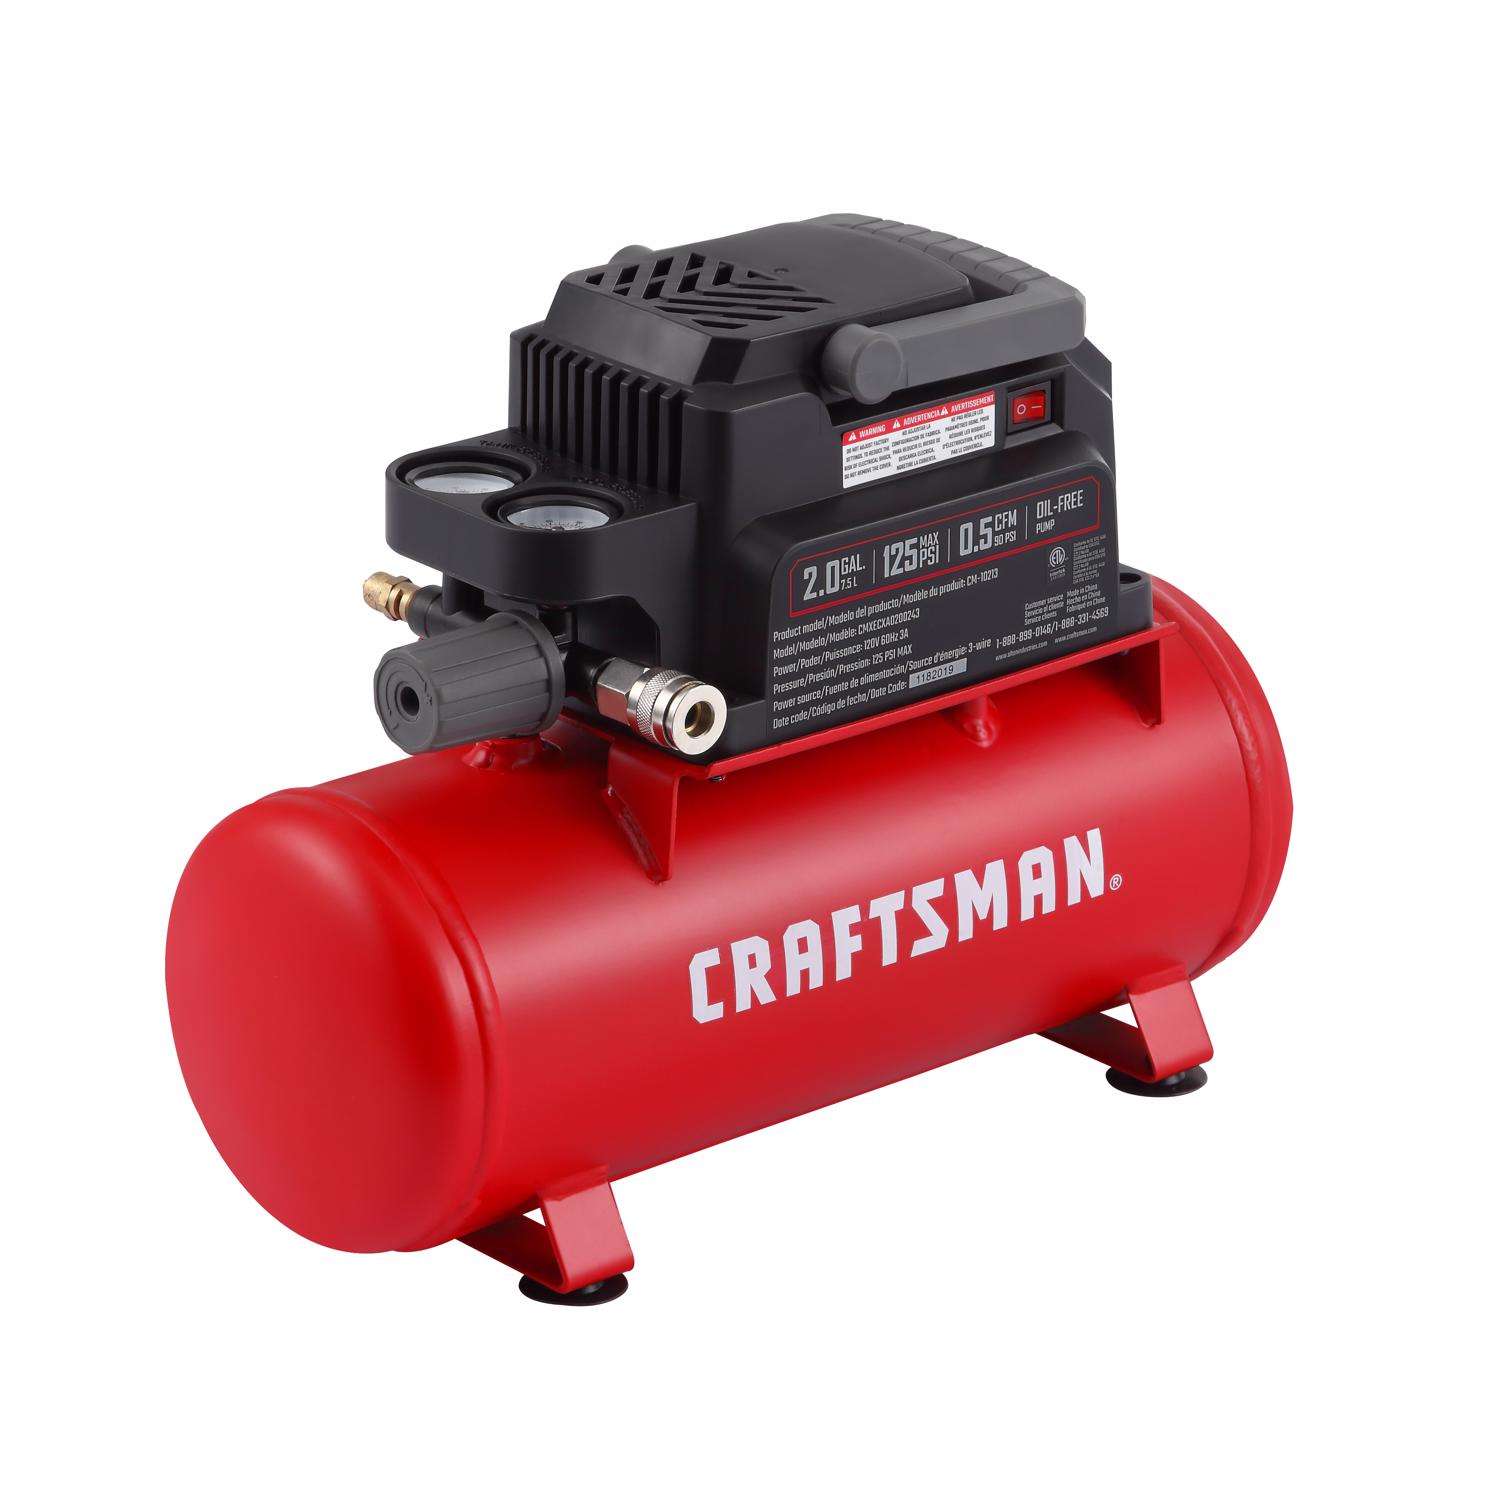 Pro Air Stand Up Air Compressor And Craftsman Air Hose for Sale in